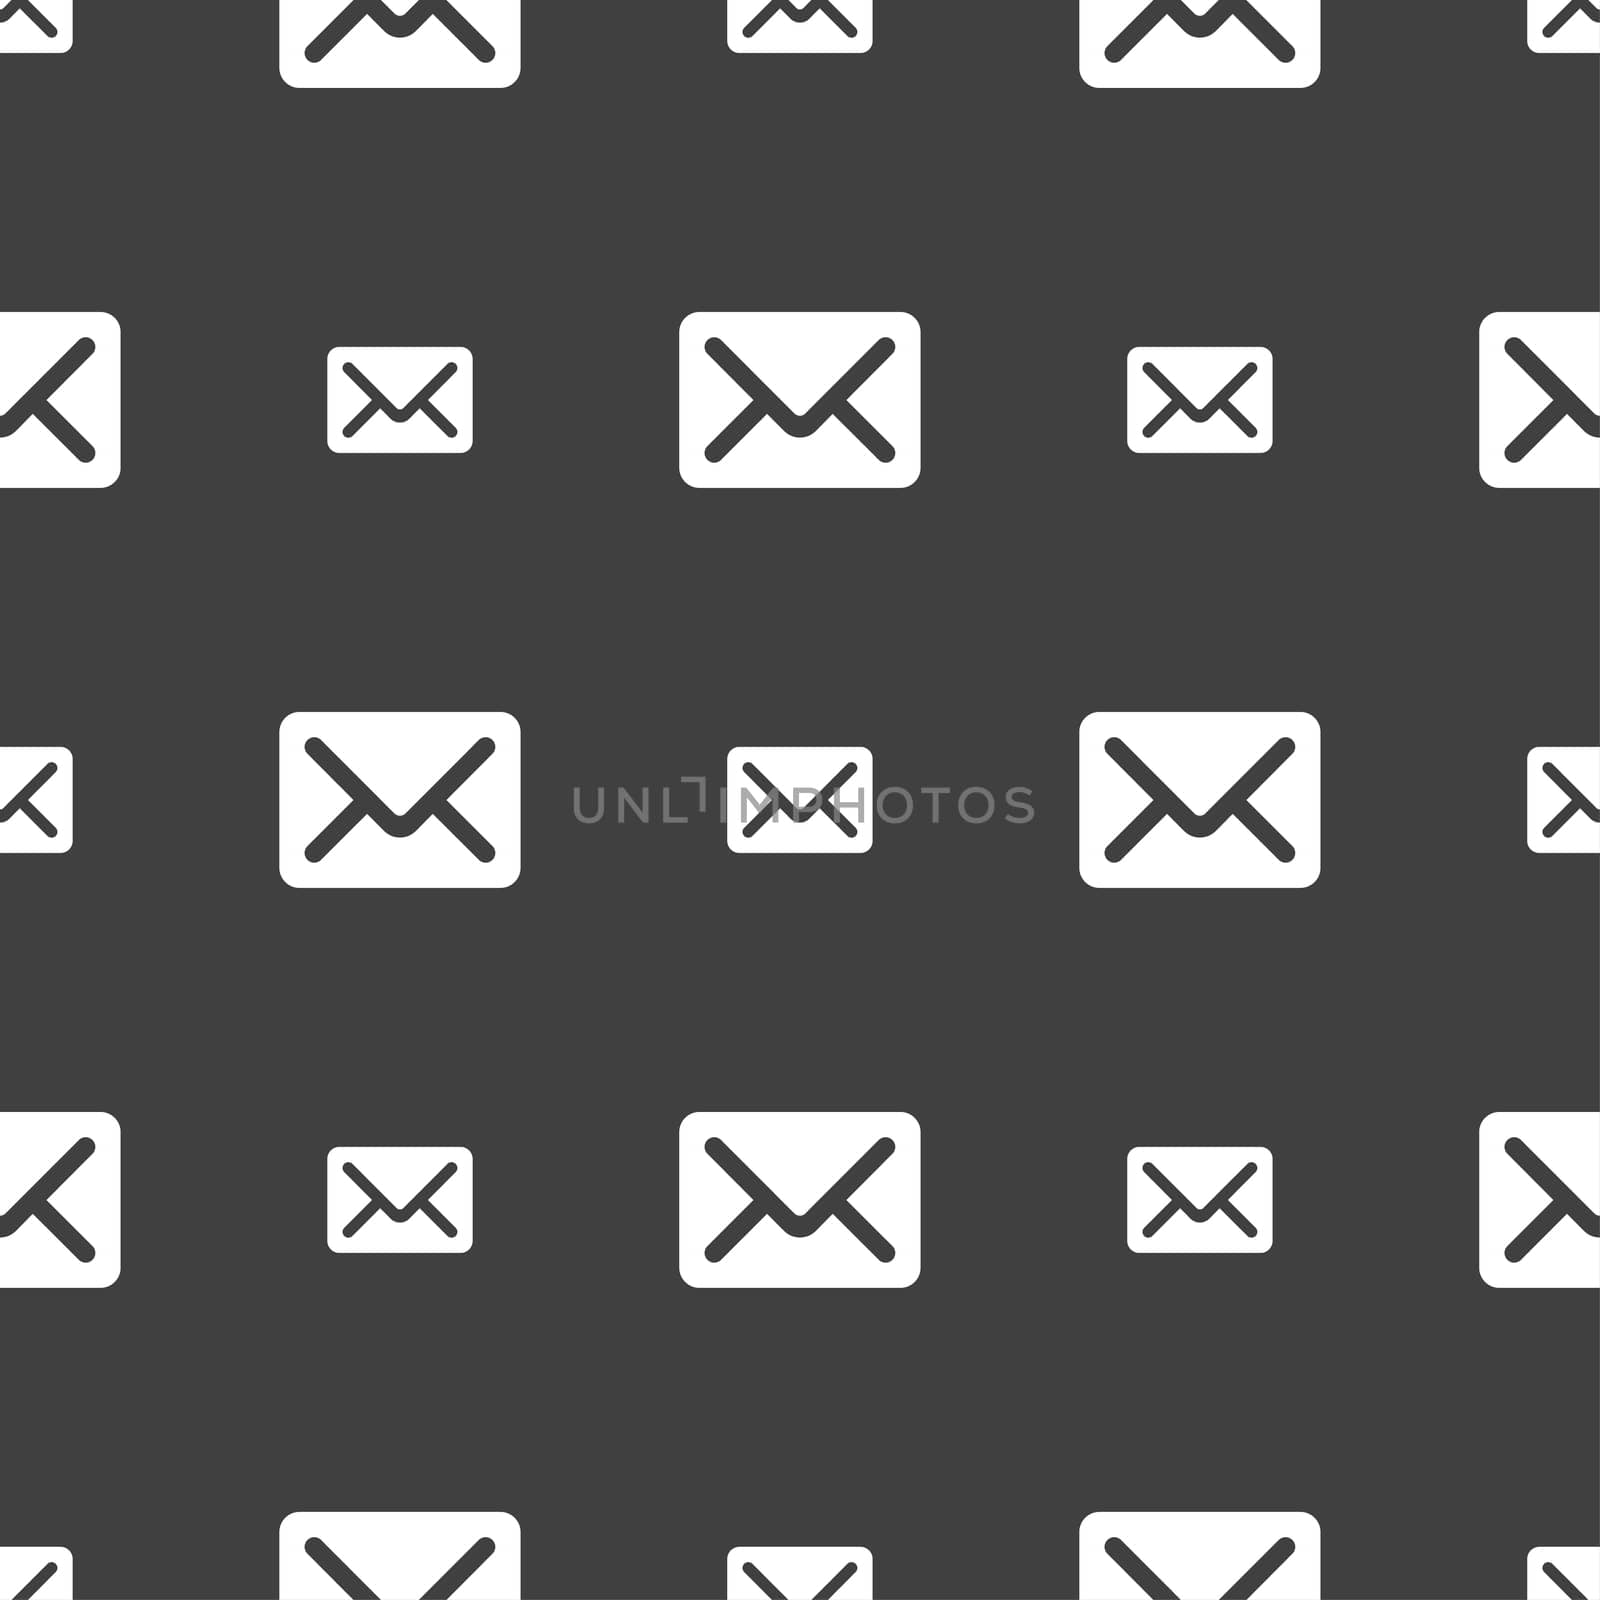 Mail, envelope, letter icon sign. Seamless pattern on a gray background. illustration